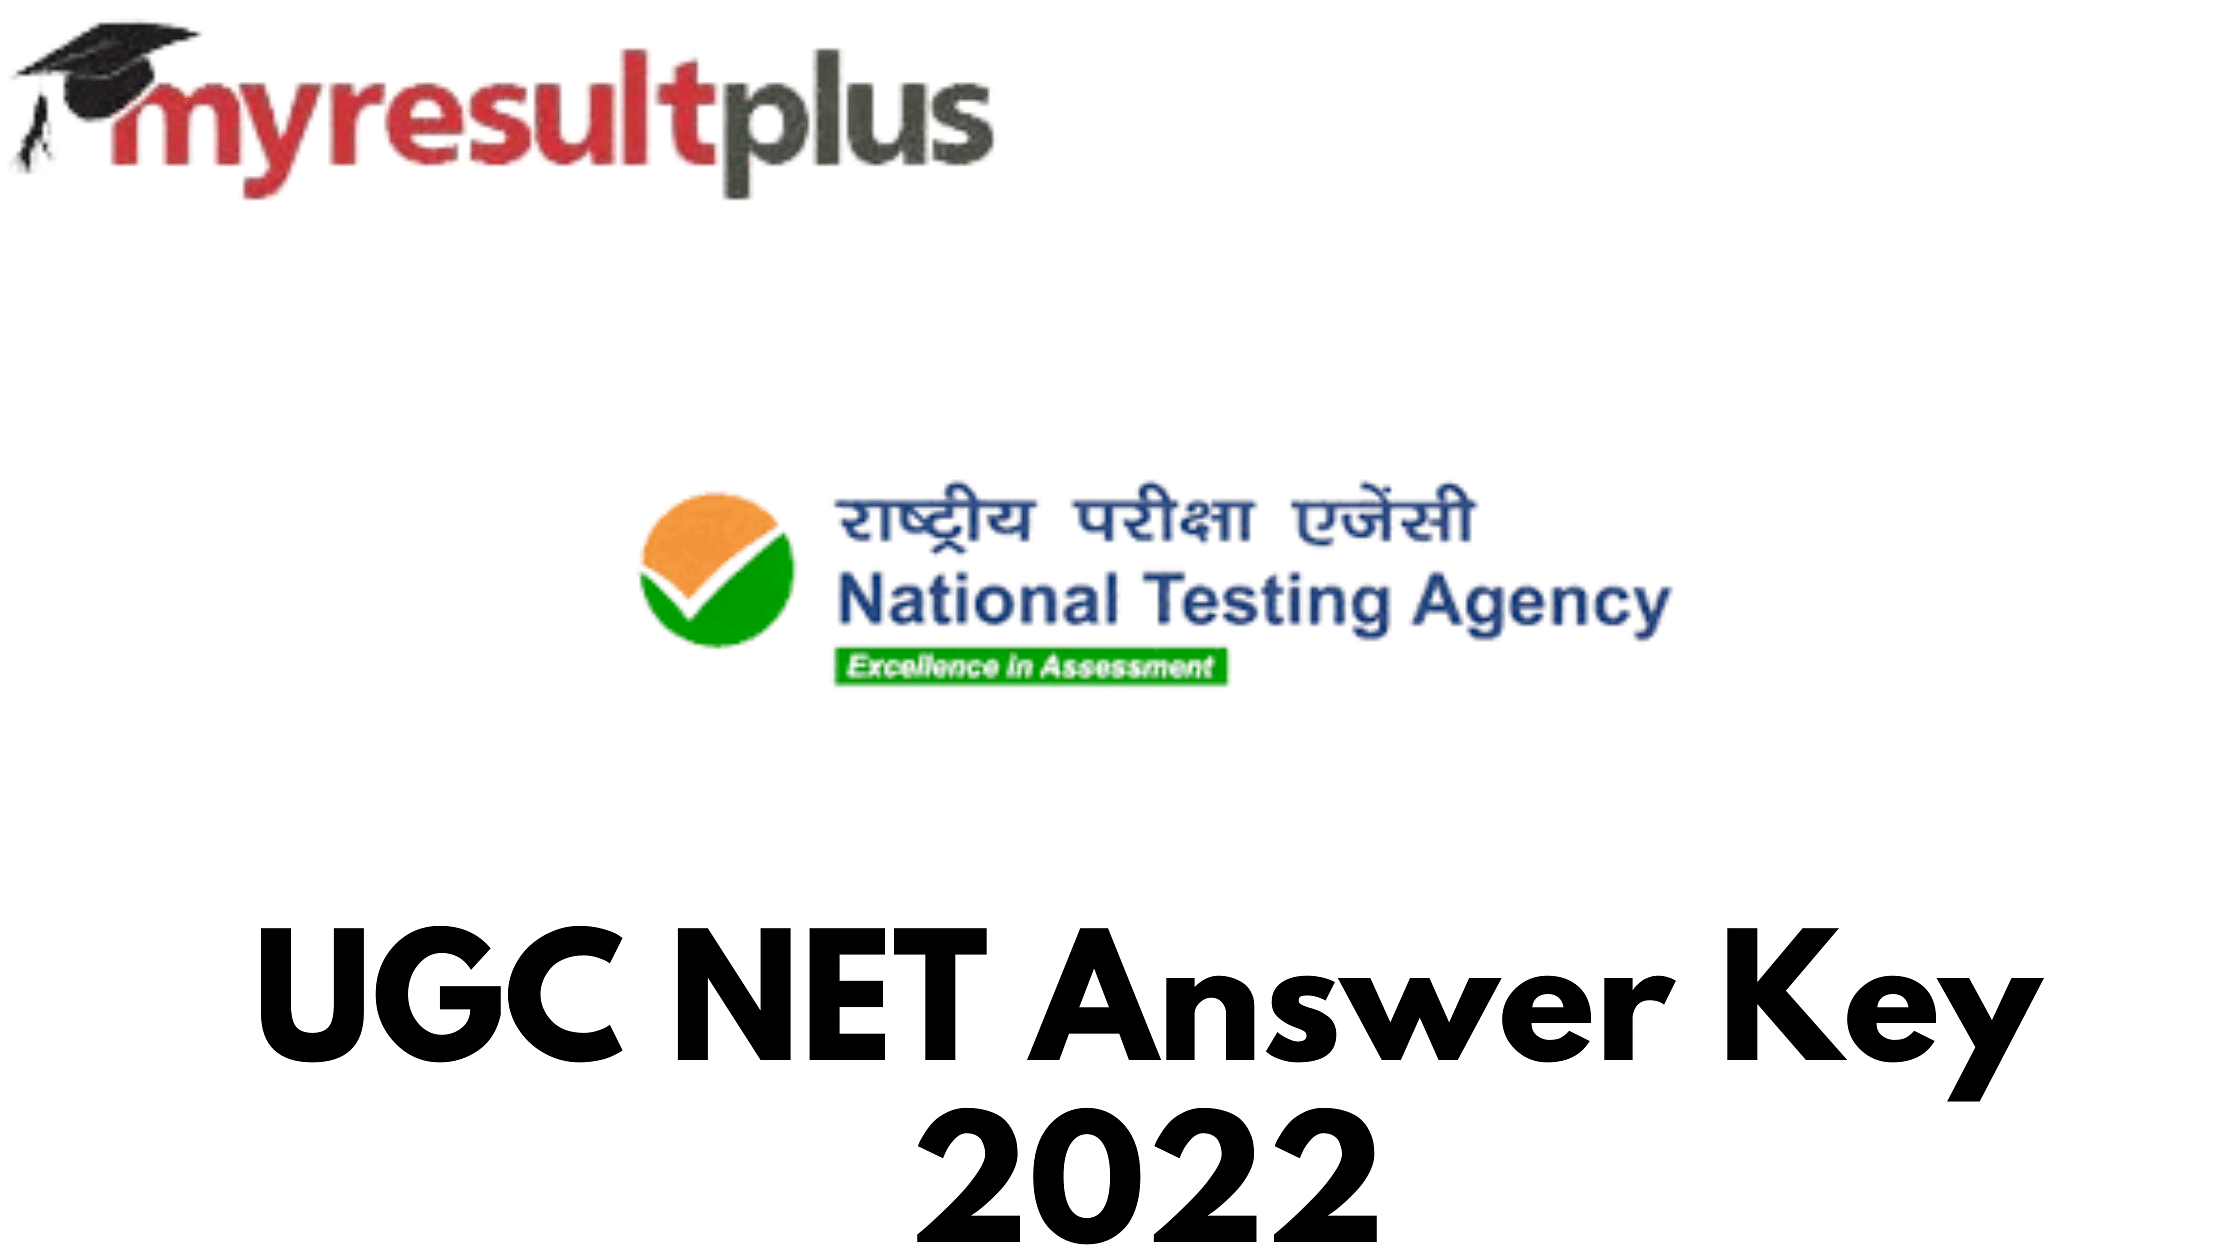 UGC NET Answer Key 2022: Objection Window Closes Today, Steps to Raise Challenges Here